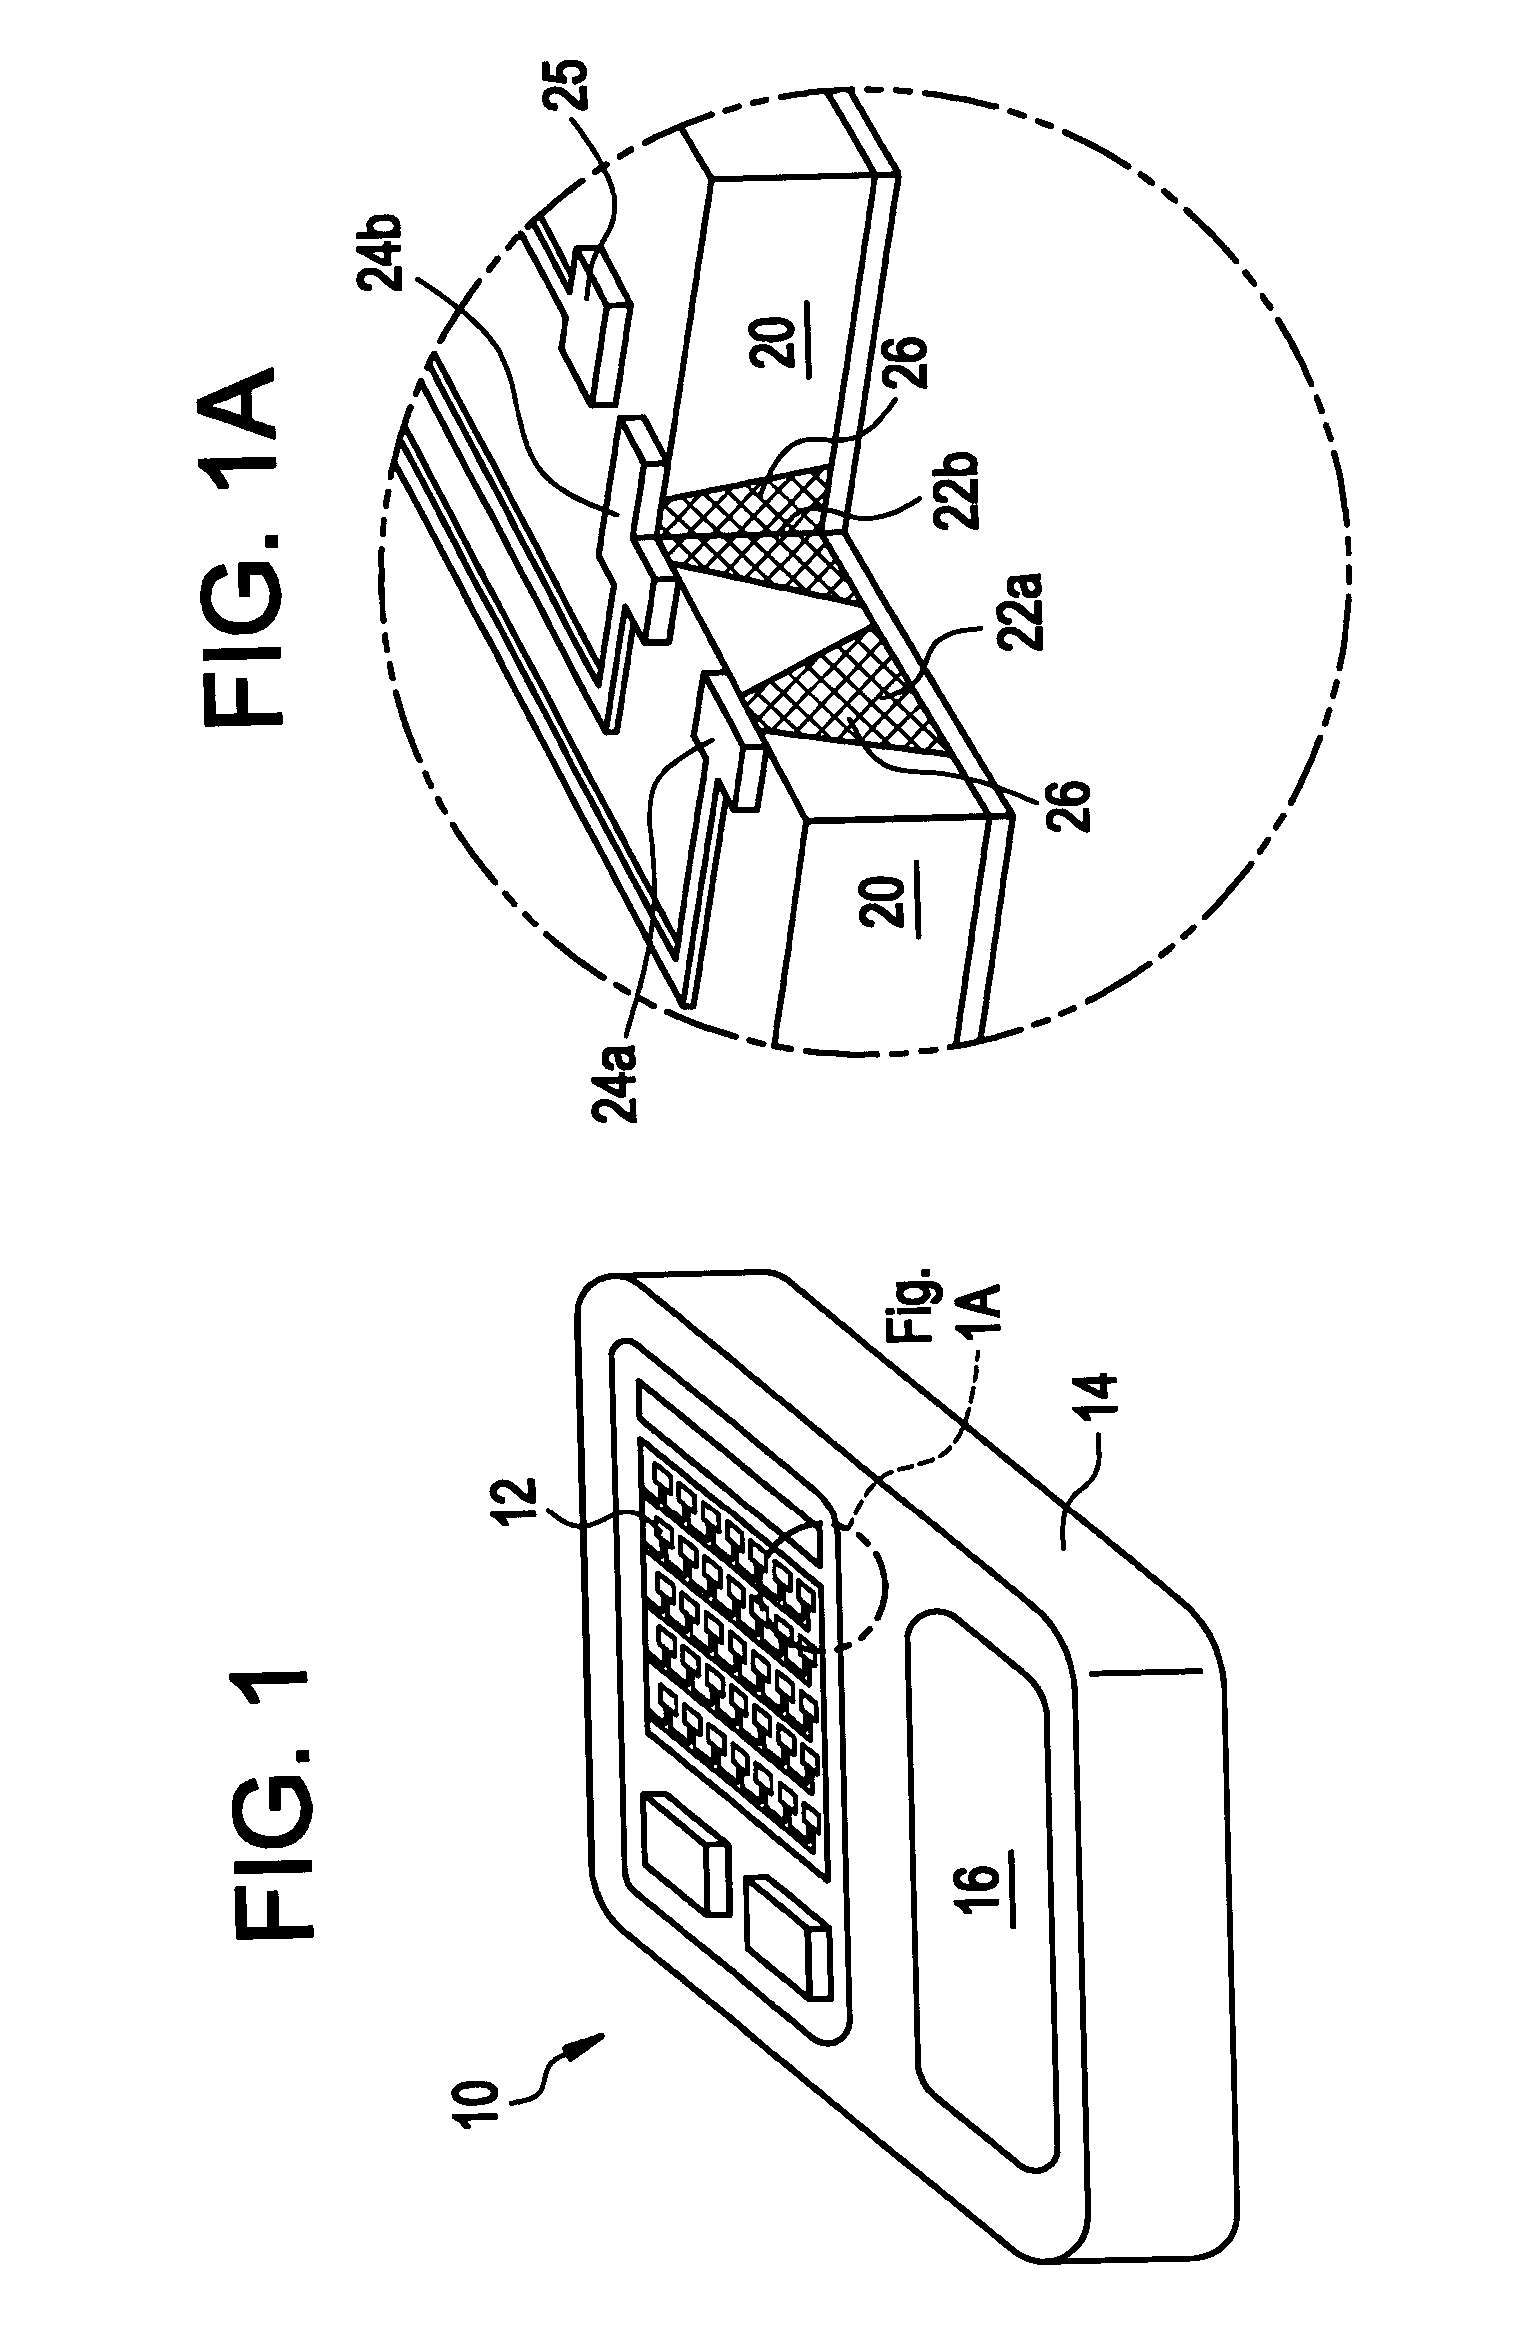 Method and device for the controlled delivery of parathyroid hormone